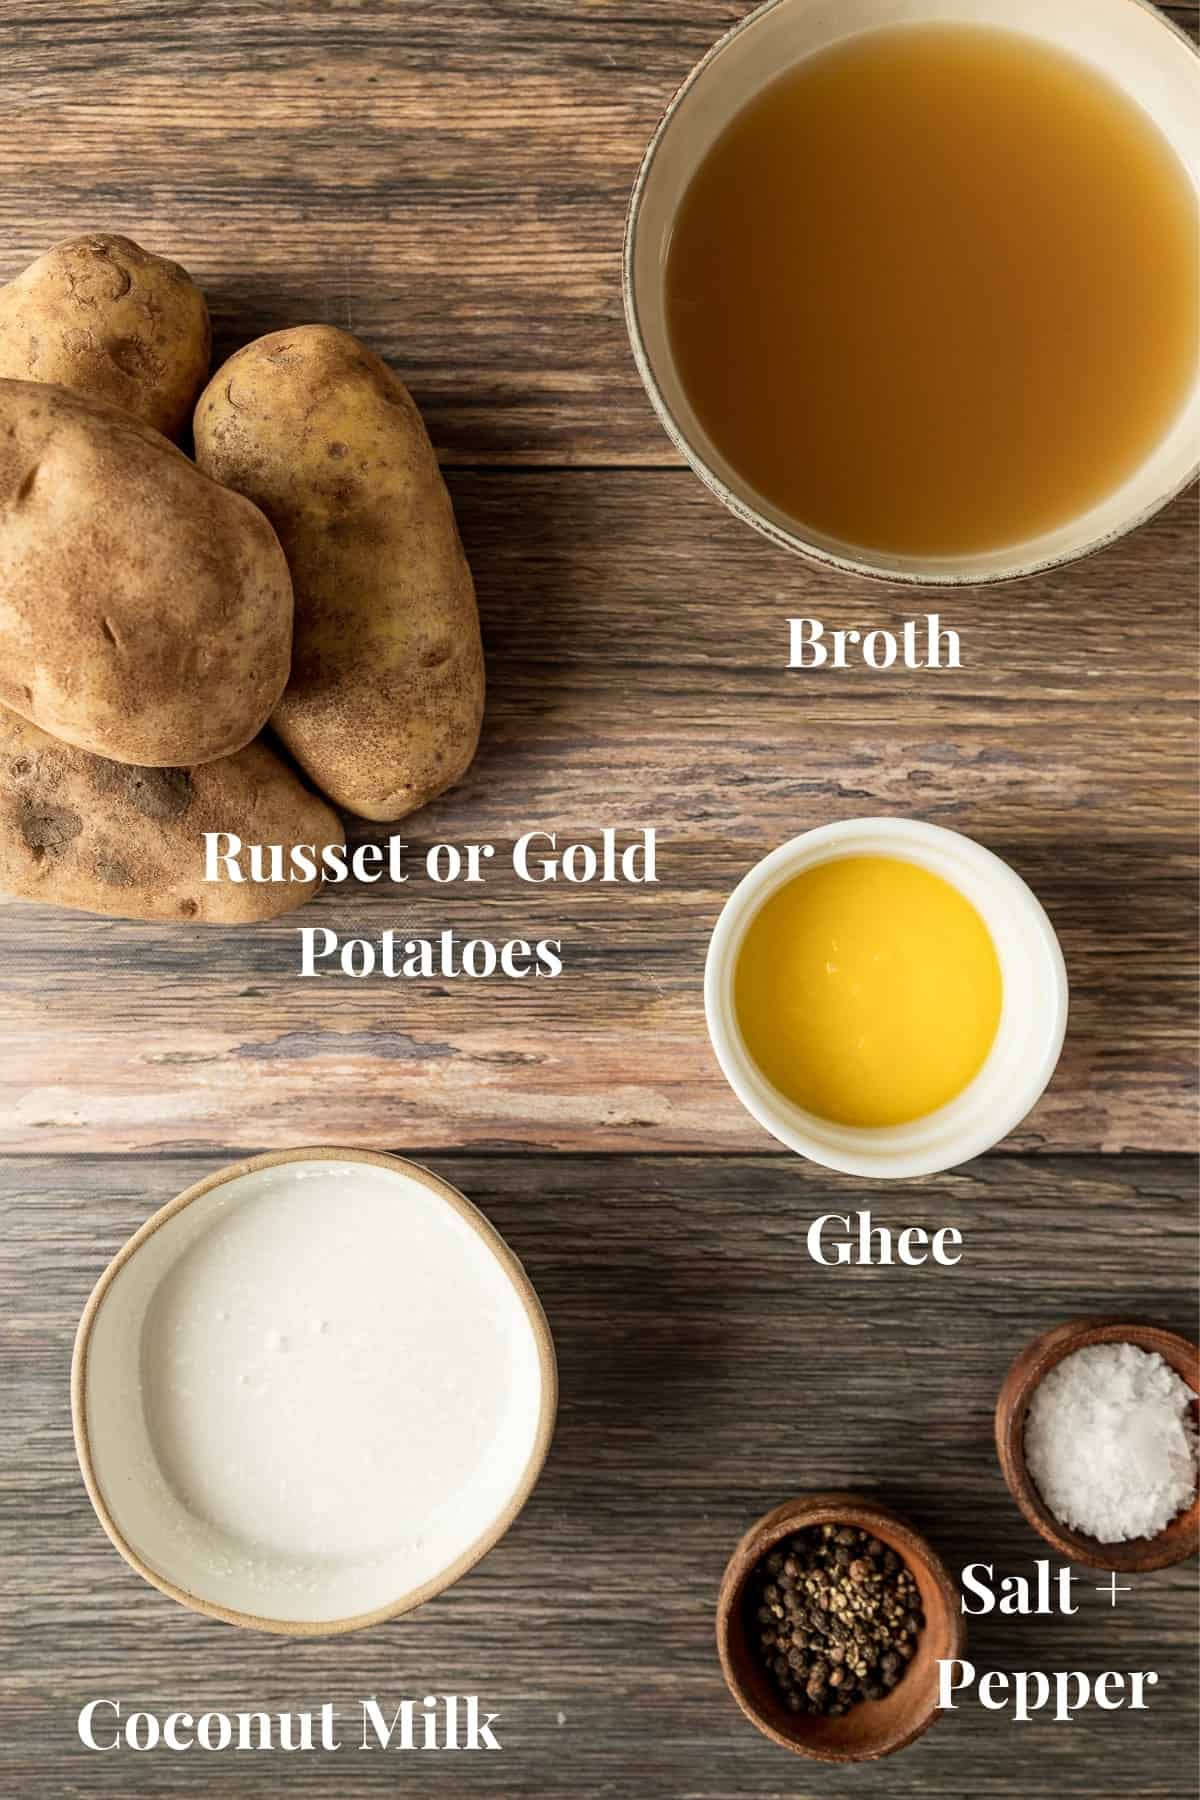 An overview shot of the ingredients needed for mashed potatoes in bowls on a wood background.